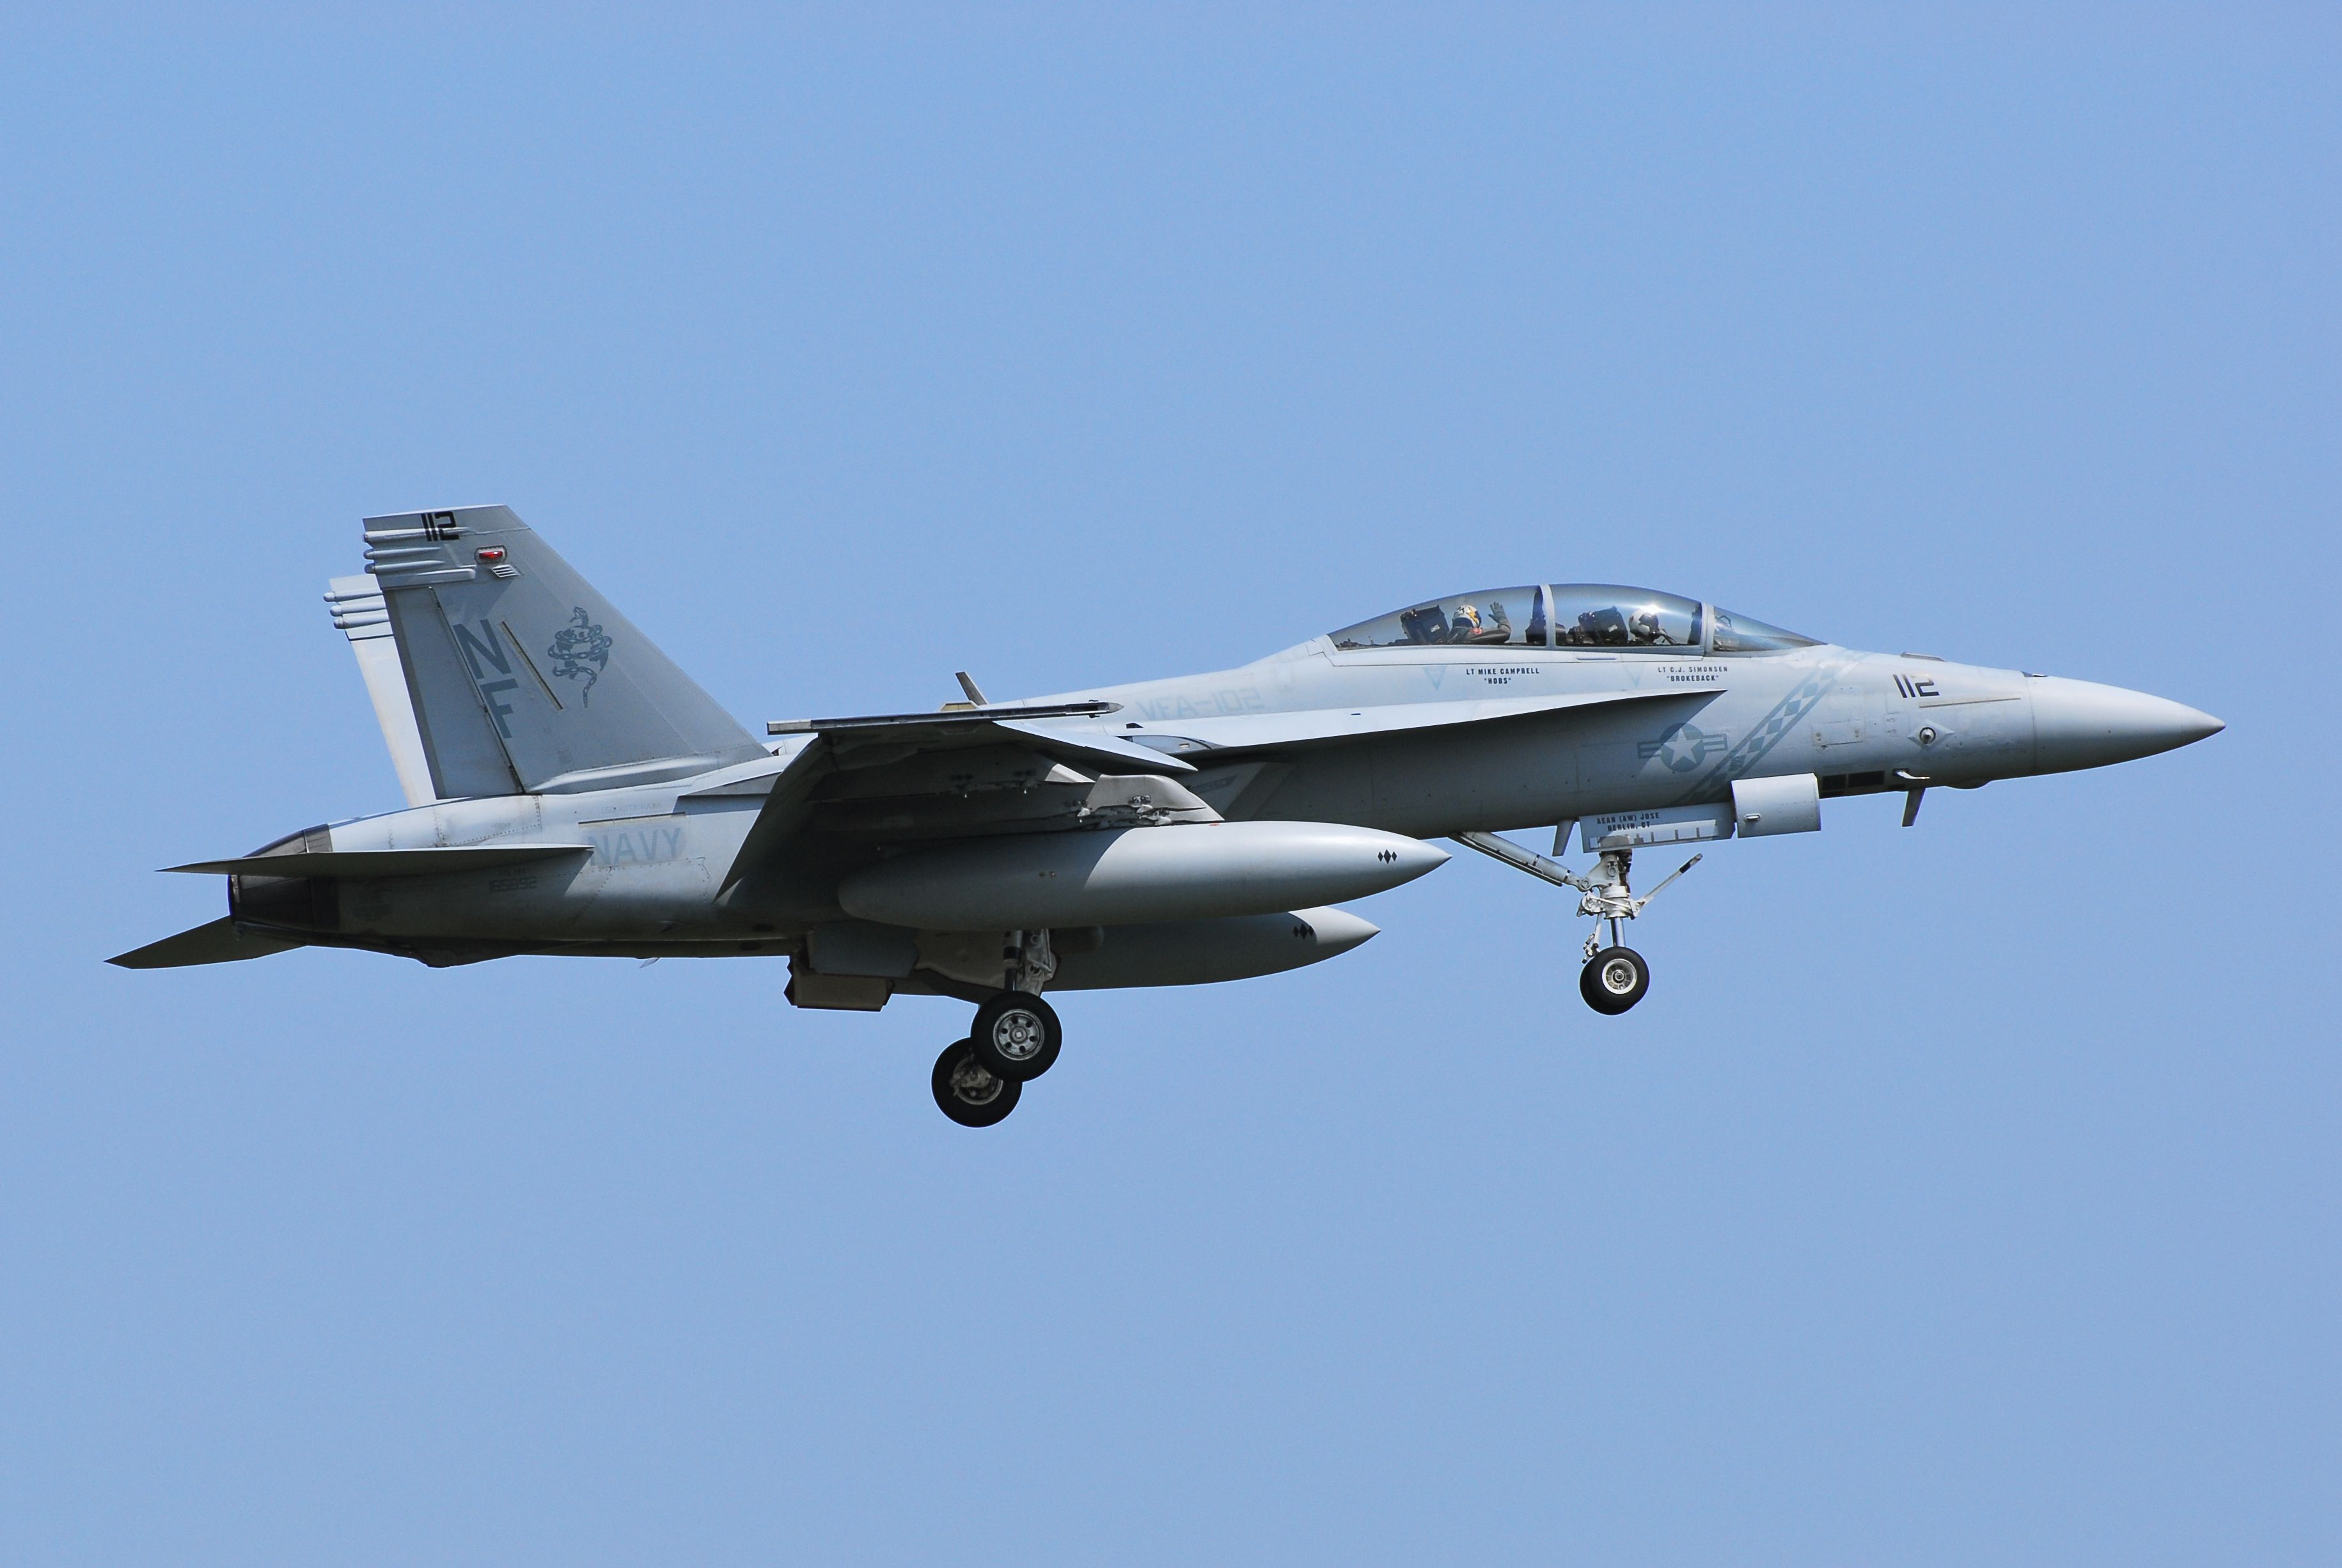 A United States Navy Boeing F/A-18F Super Hornet flying in the sky.